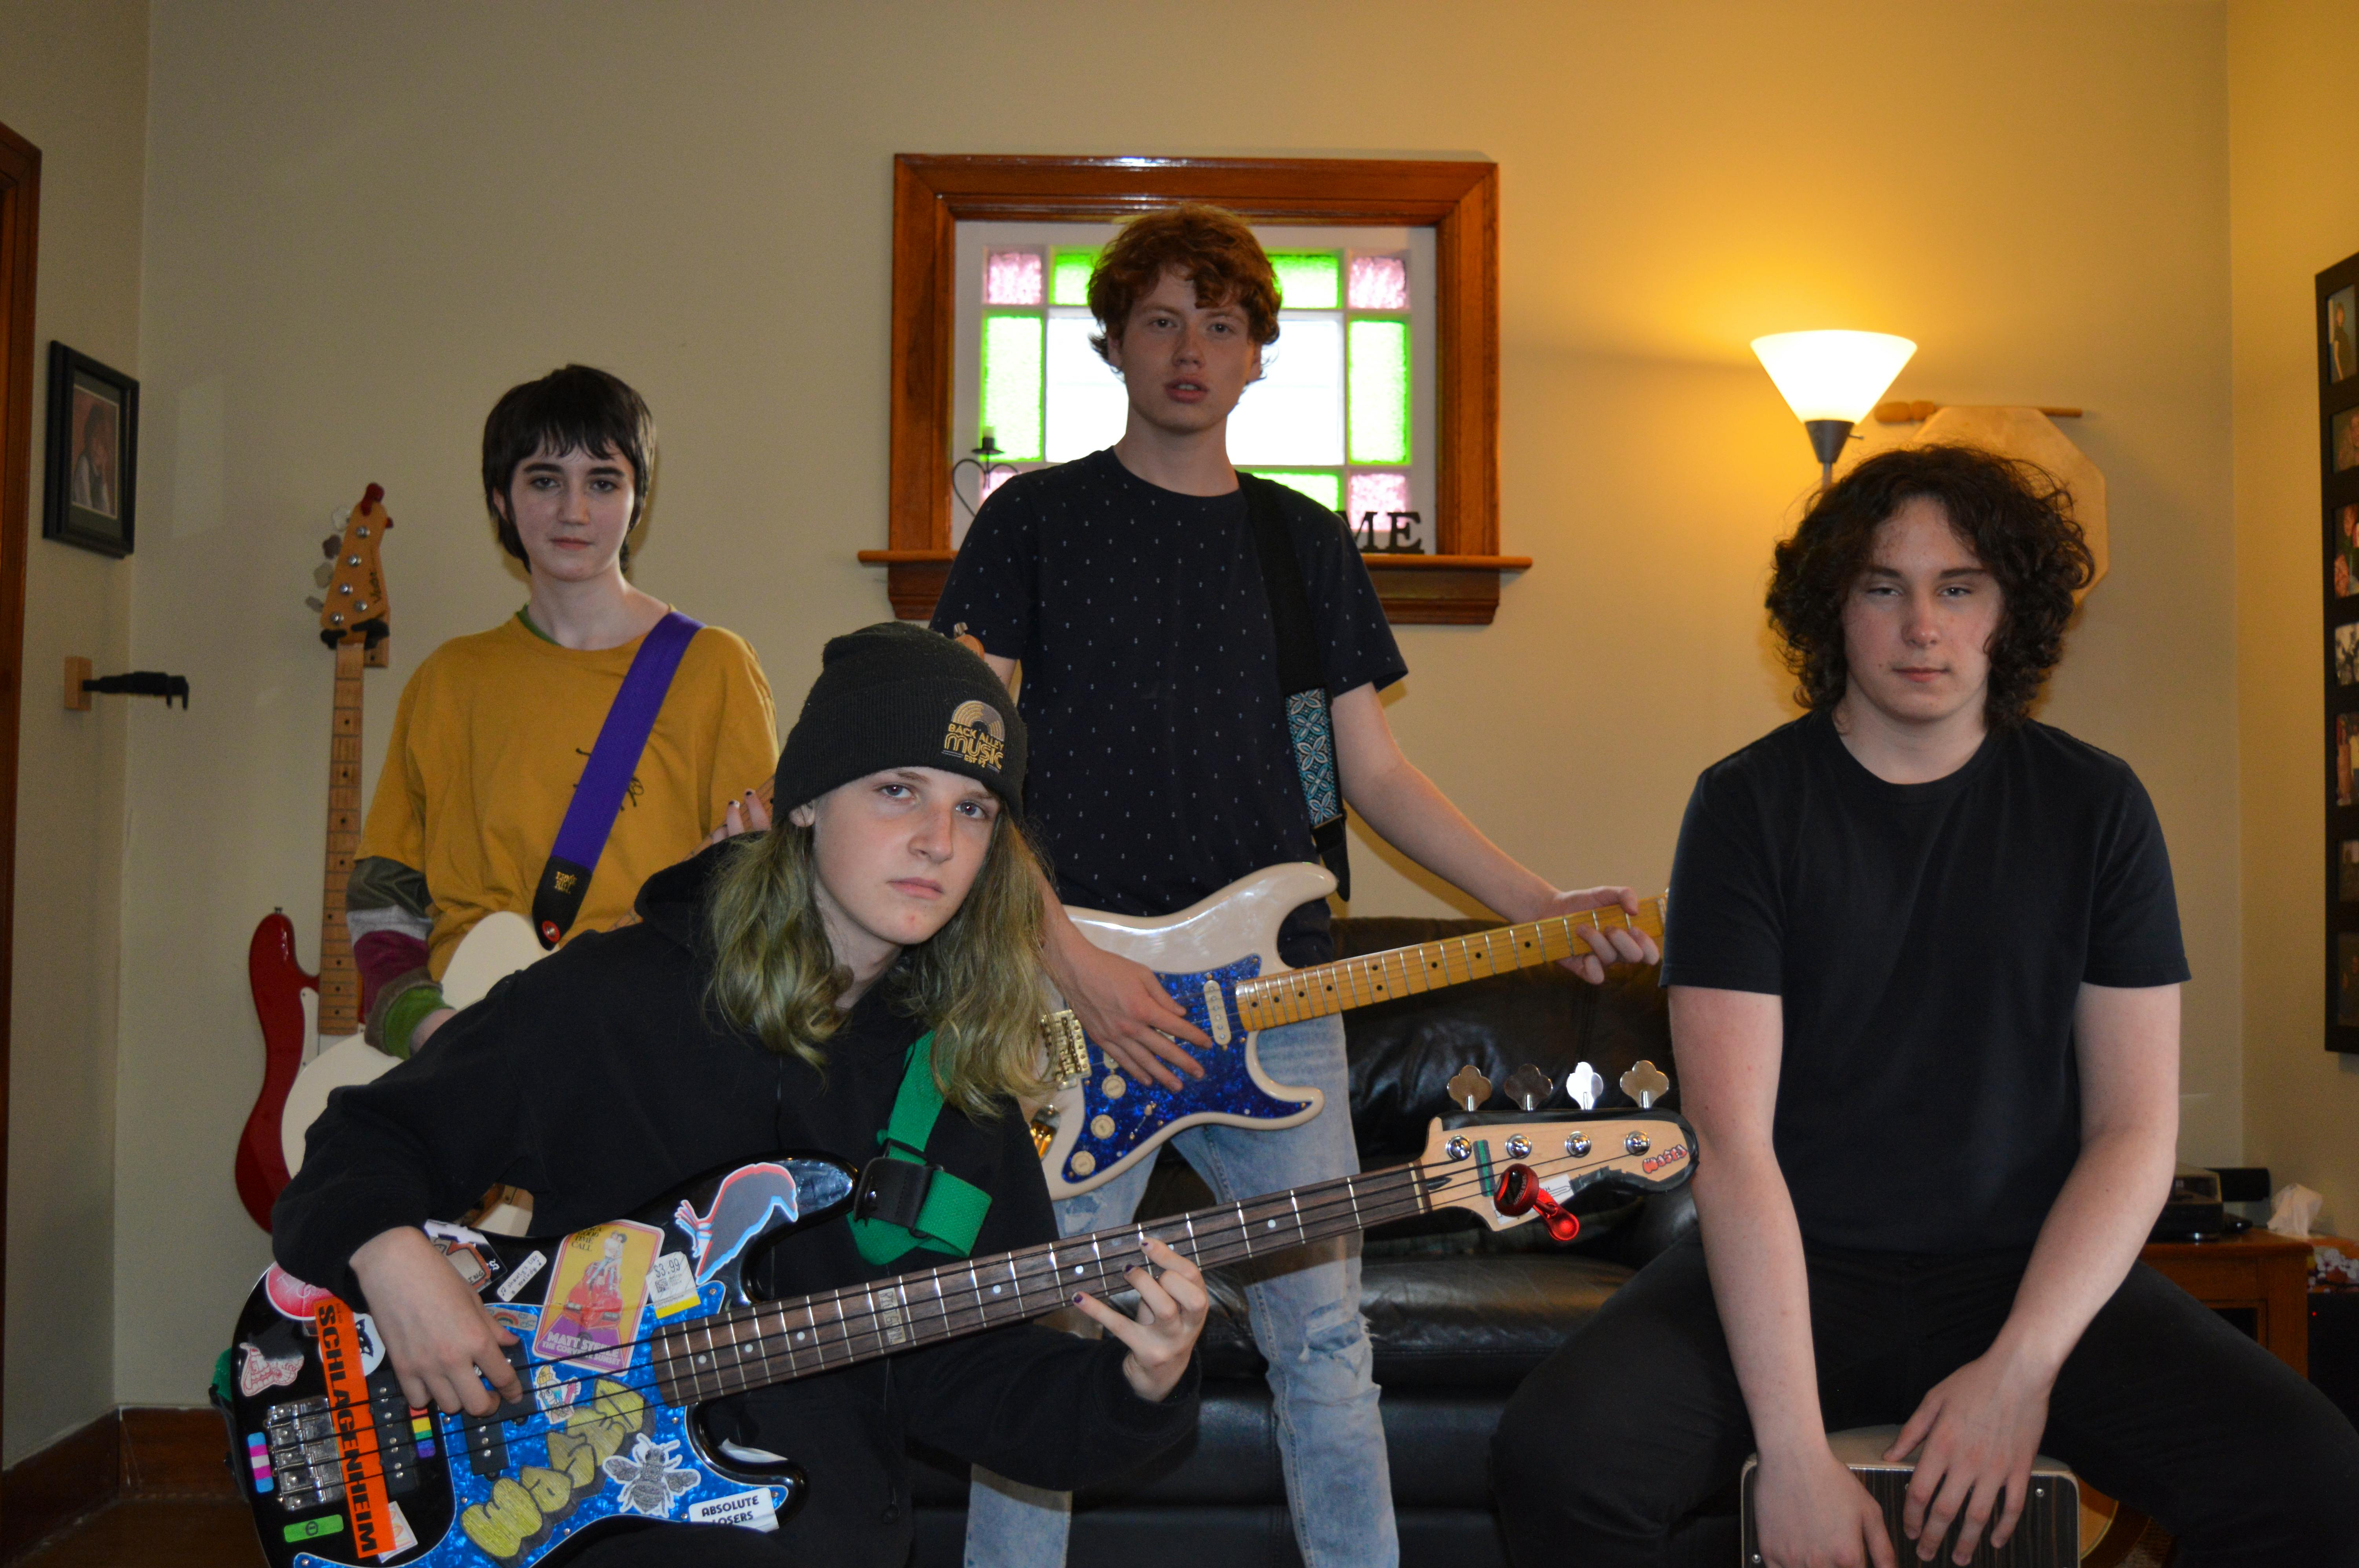 Members of Moment of Eclipse are, front row, Charlotte Lloyd, bass; and Jesse MacCormac, drums. Back row, Casey Mann, guitar; and Nicholas Dickieson, lead singer. The band just released its first single, Obsessive, Compulsive.